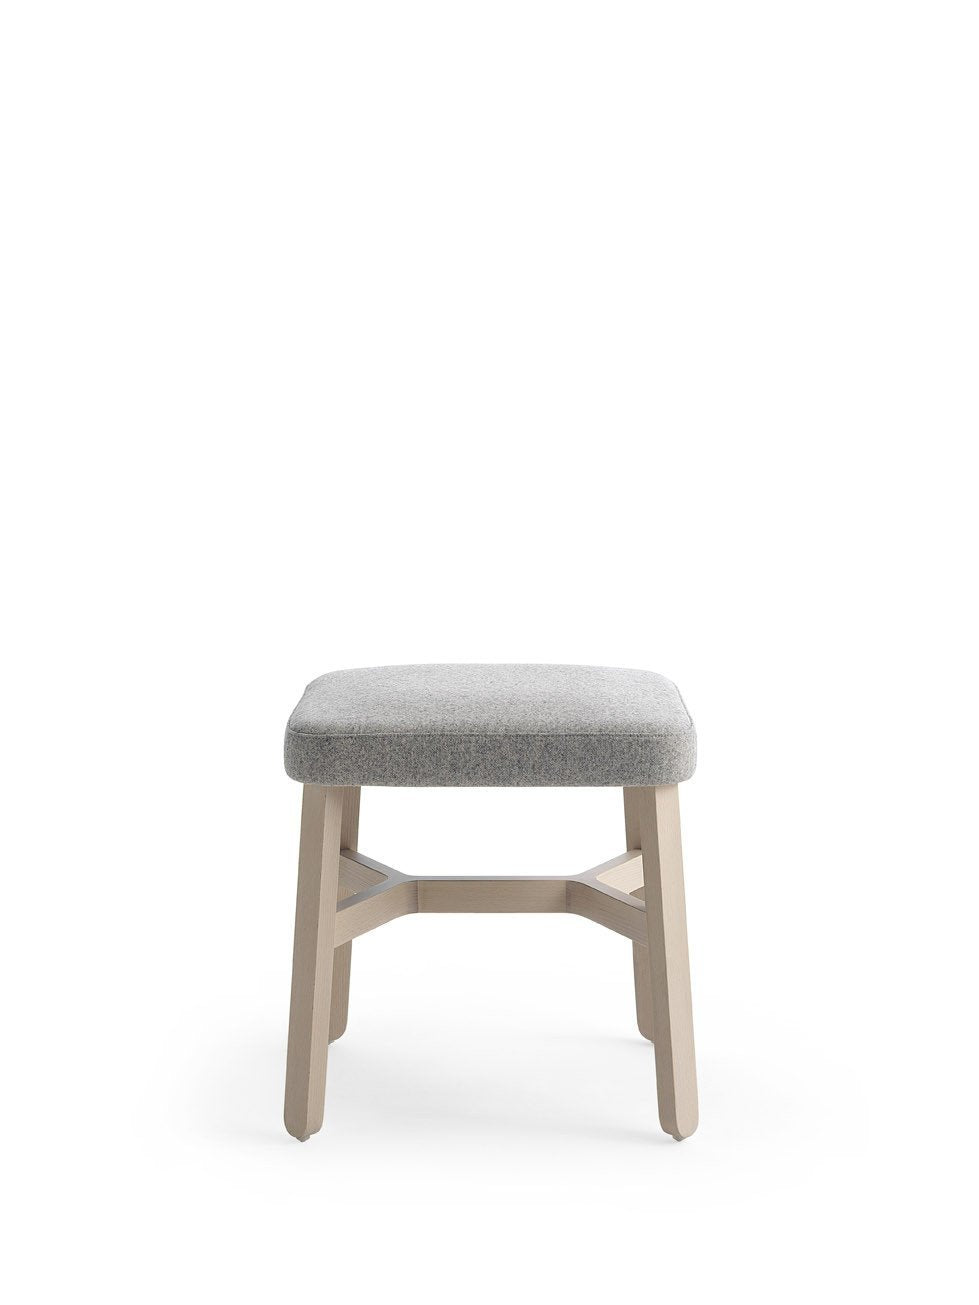 Croissant 579 Low Stool-Billiani-Contract Furniture Store